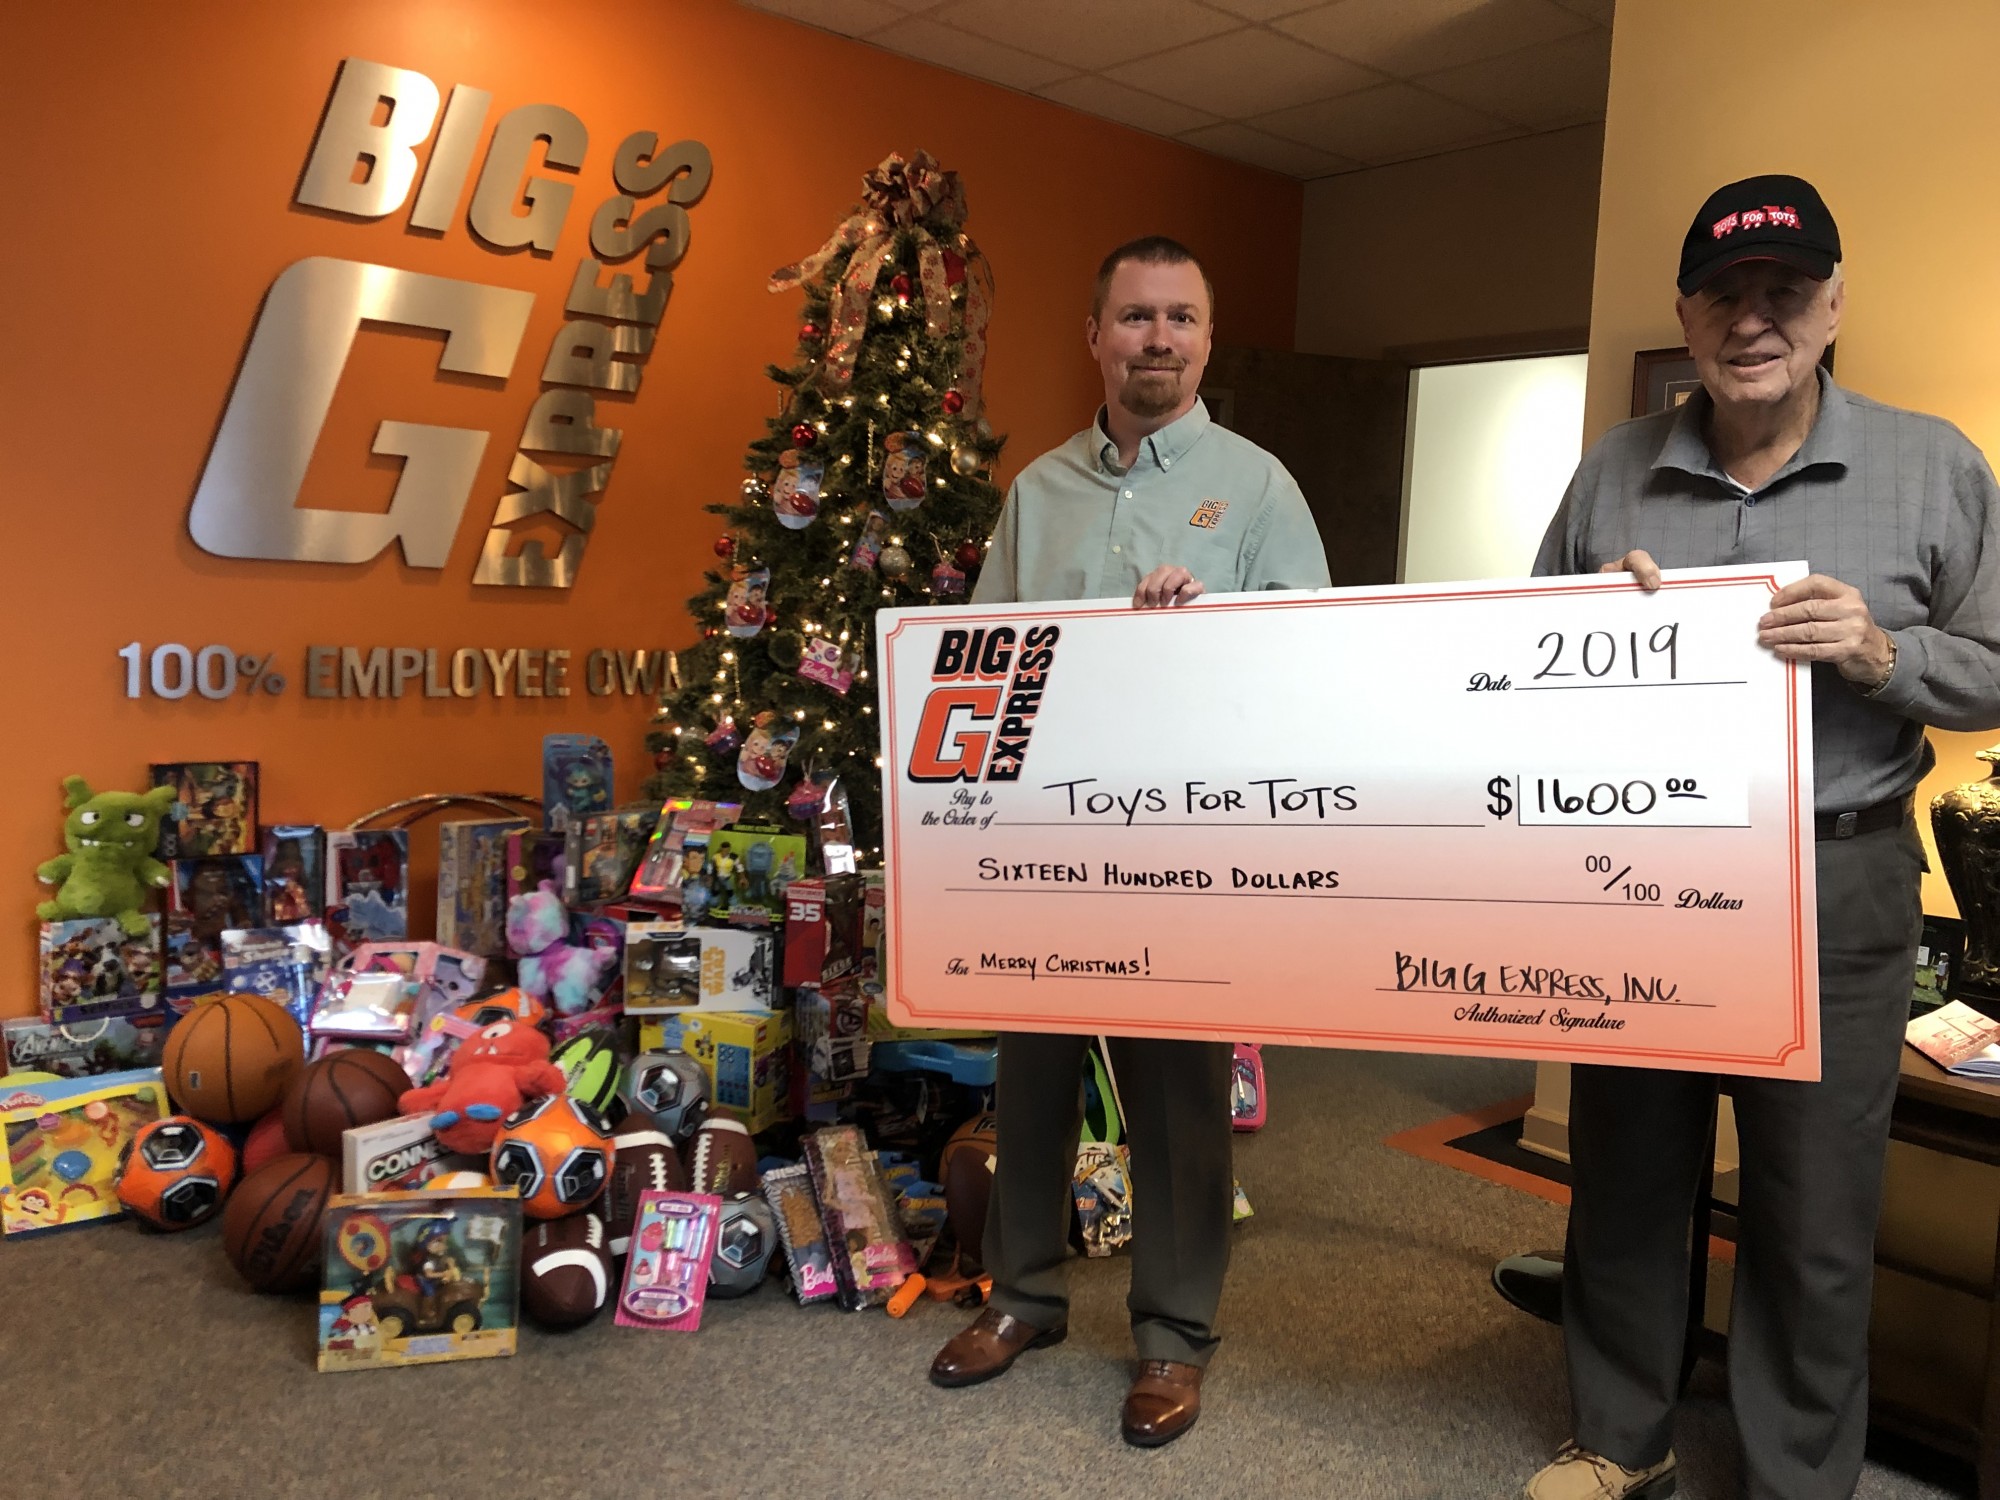 Big G Express Supports Toys for Tots